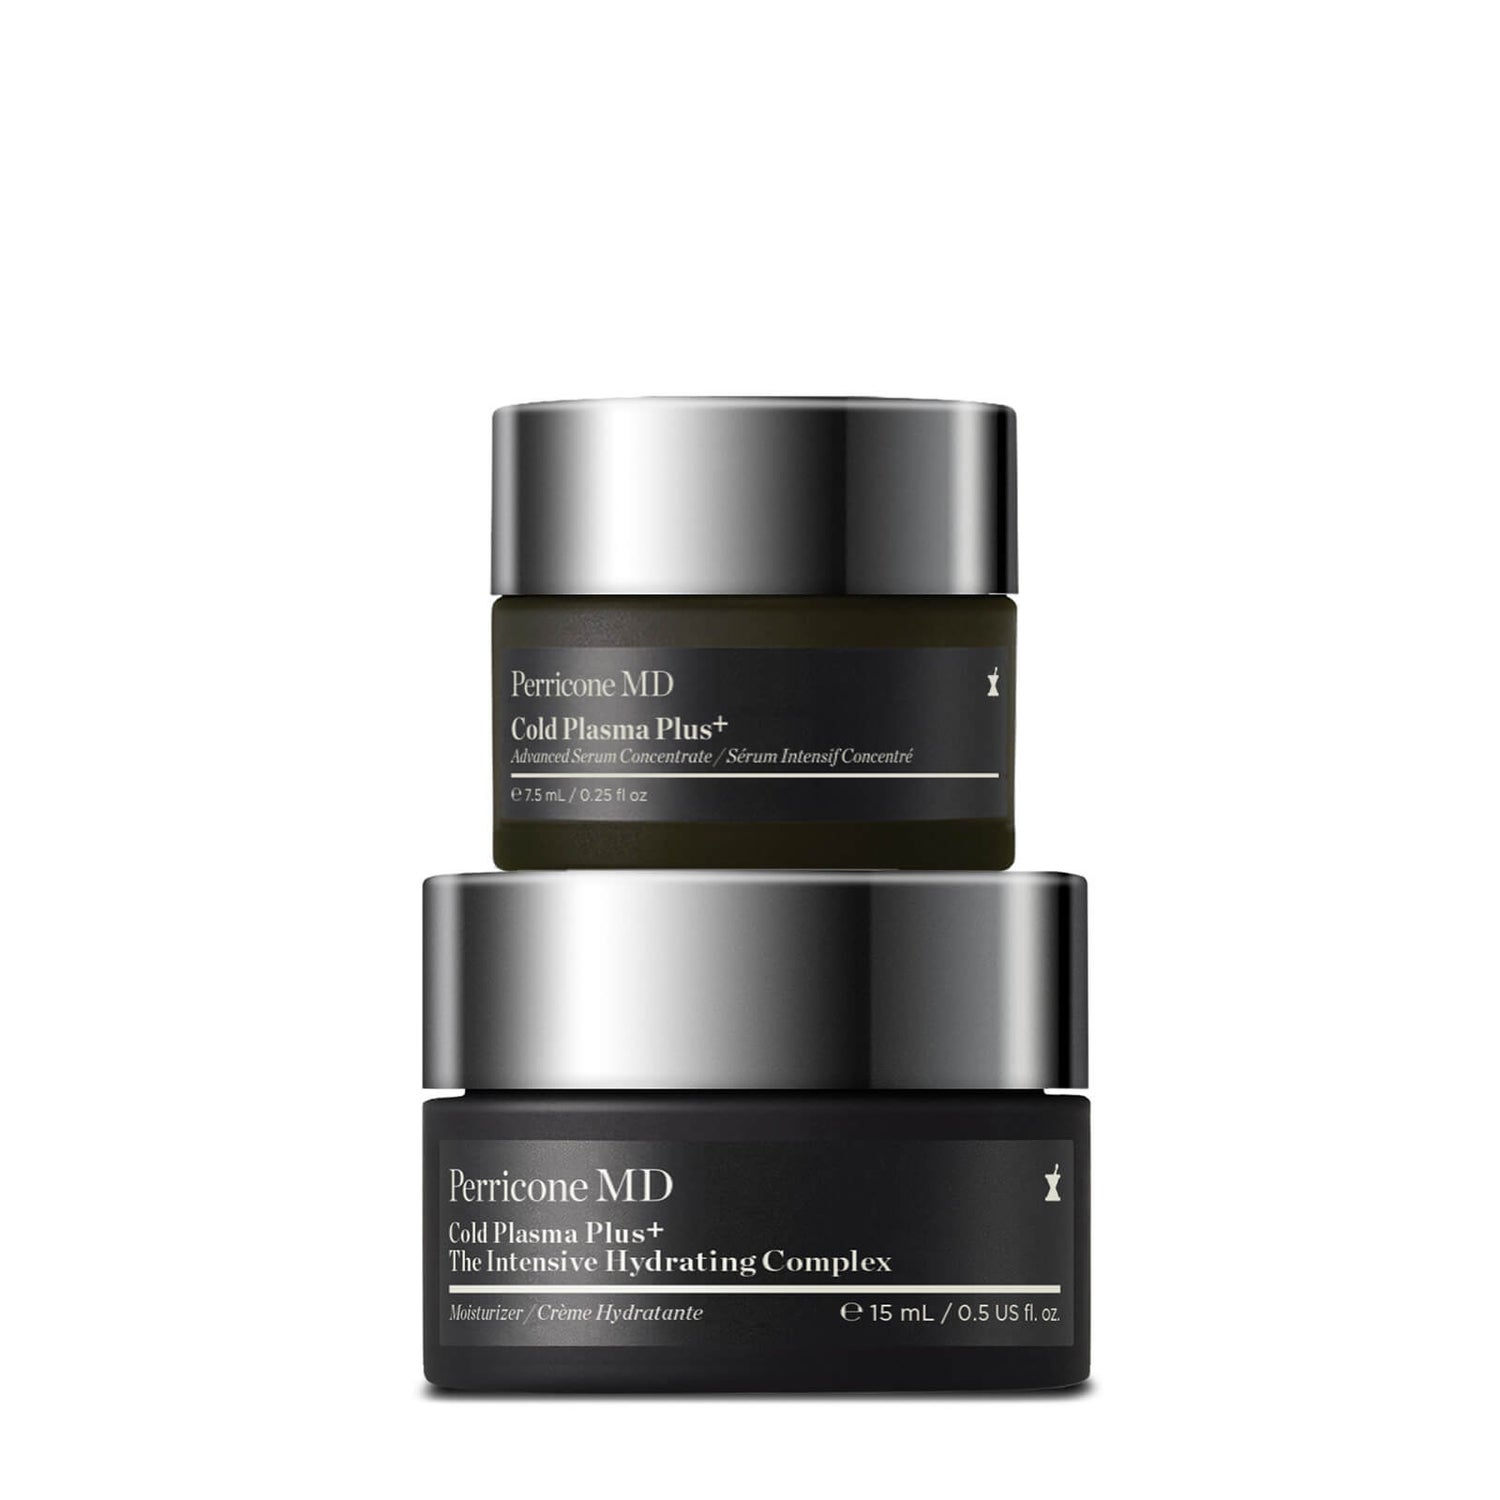 Perricone MD CPP+ Multi-Tasking Deluxe Duo